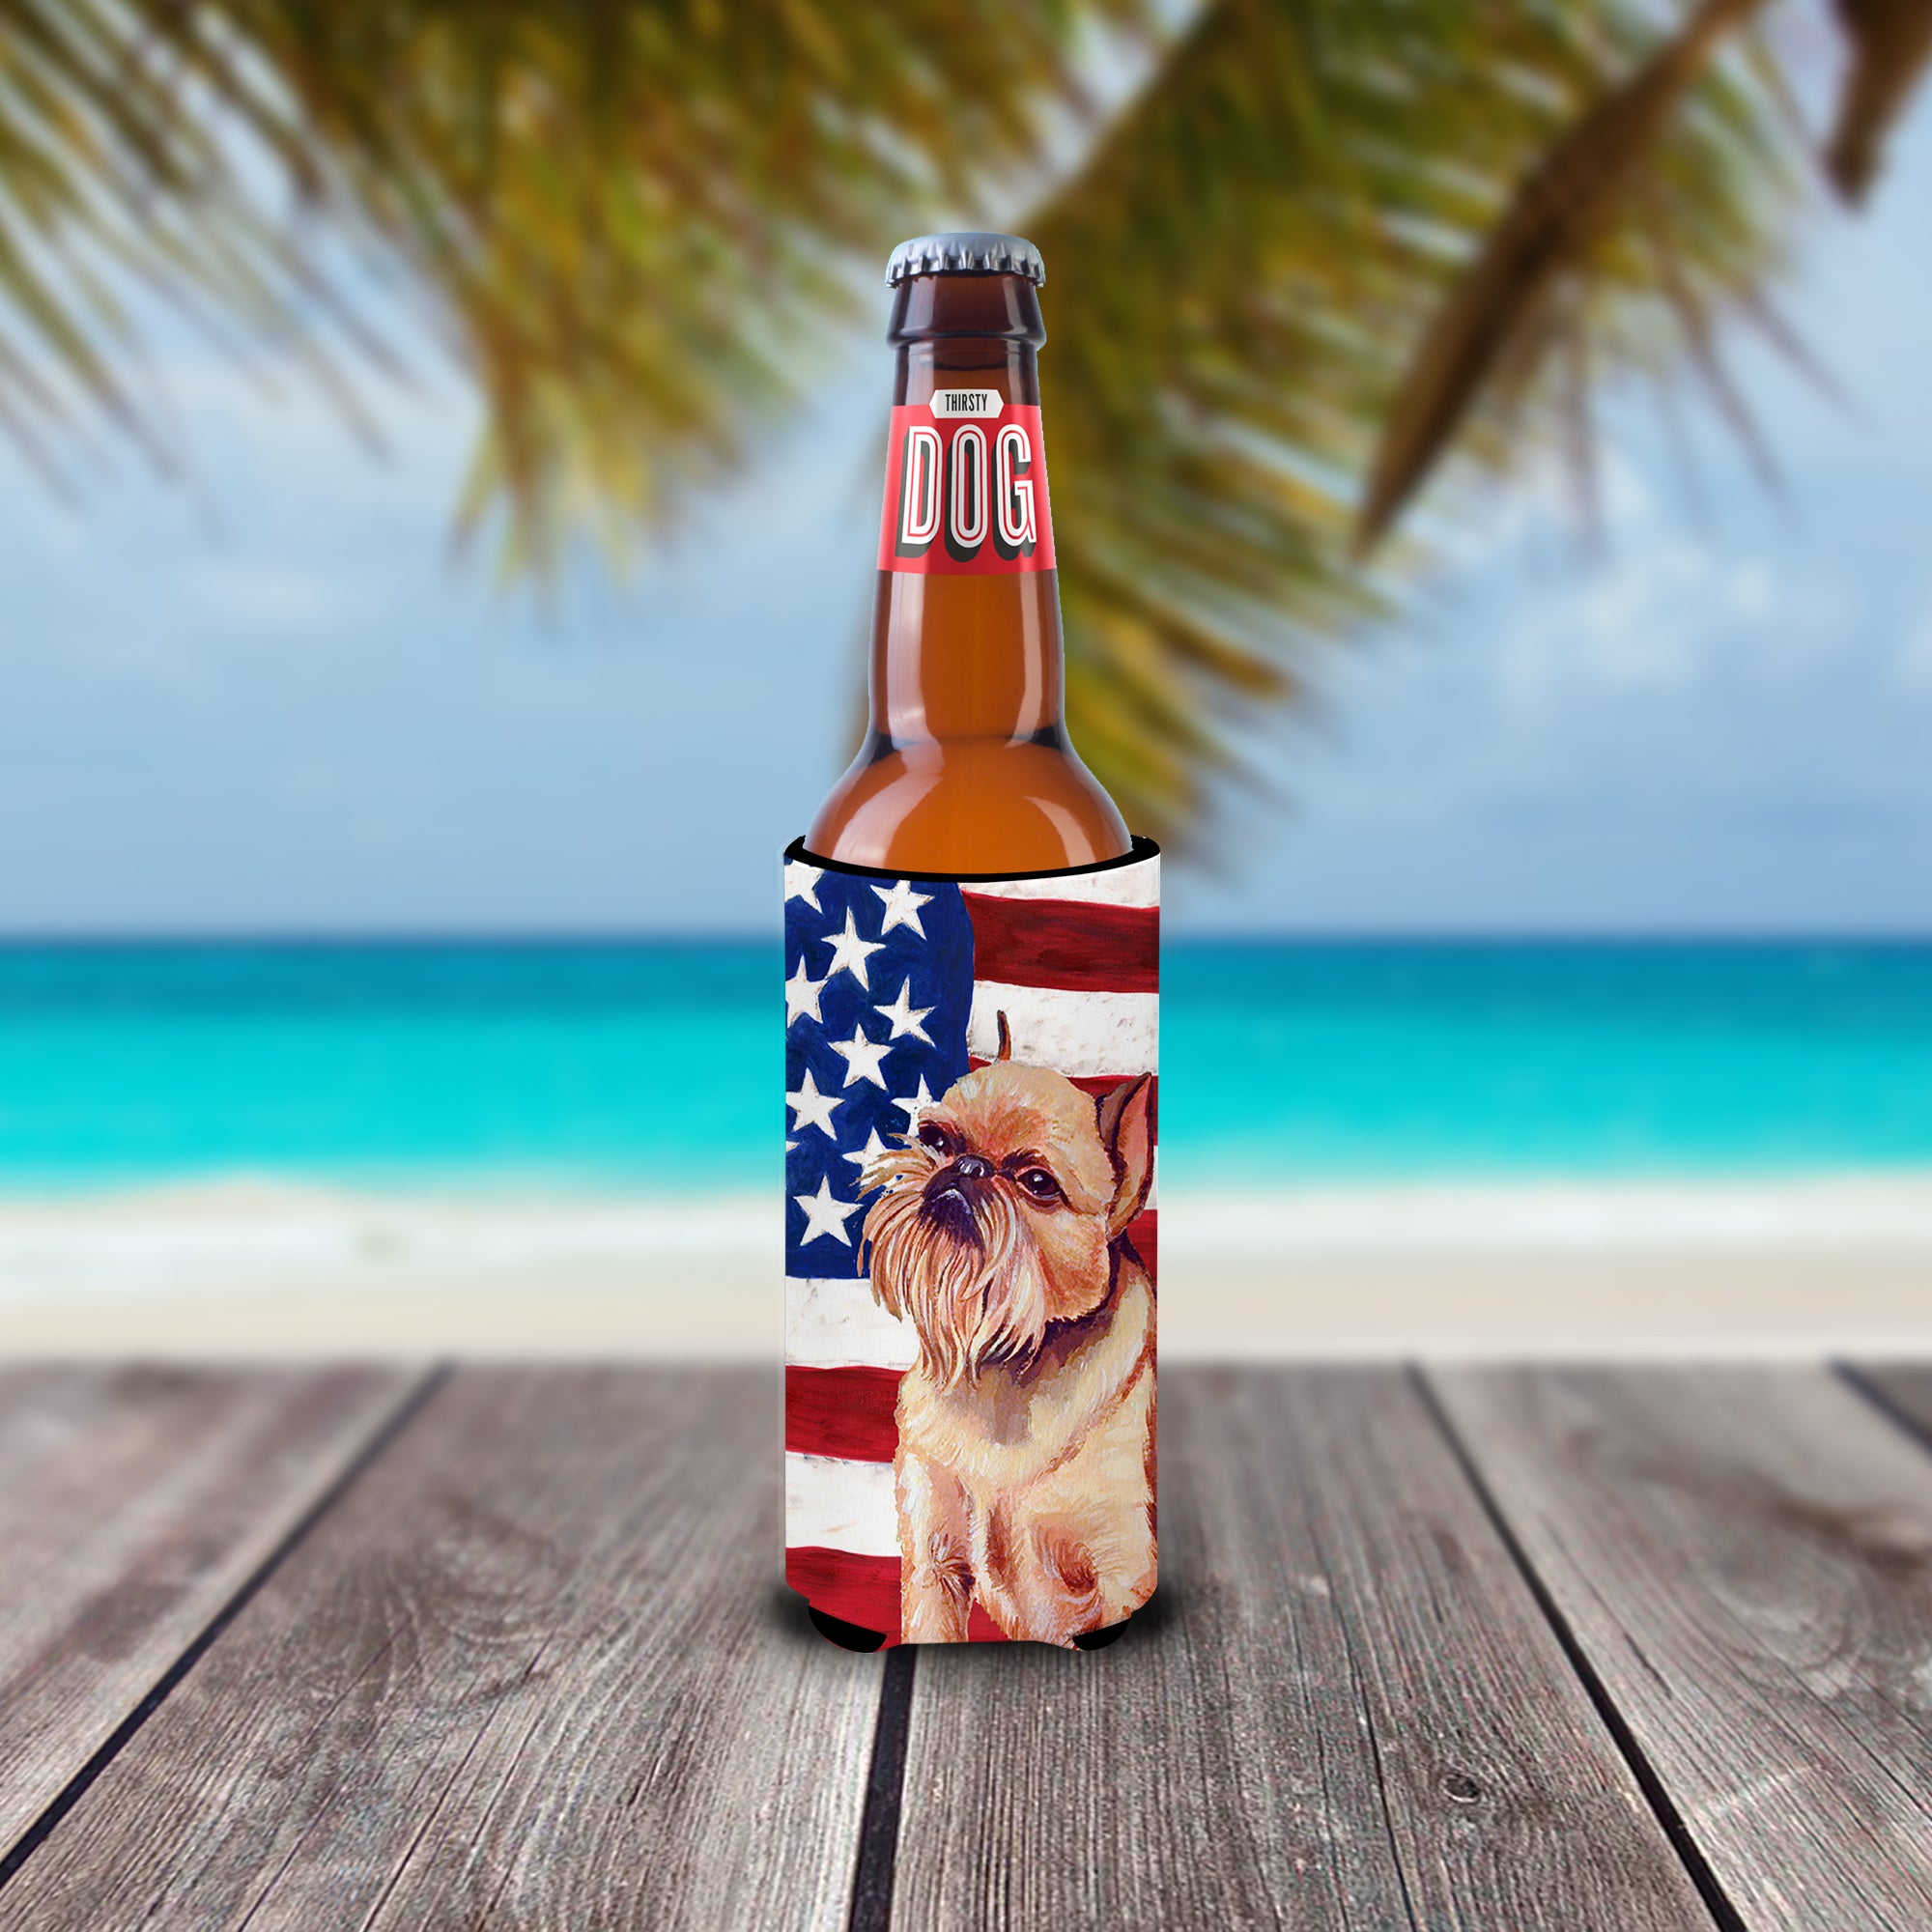 USA American Flag with Brussels Griffon Ultra Beverage Insulators for slim cans LH9023MUK.